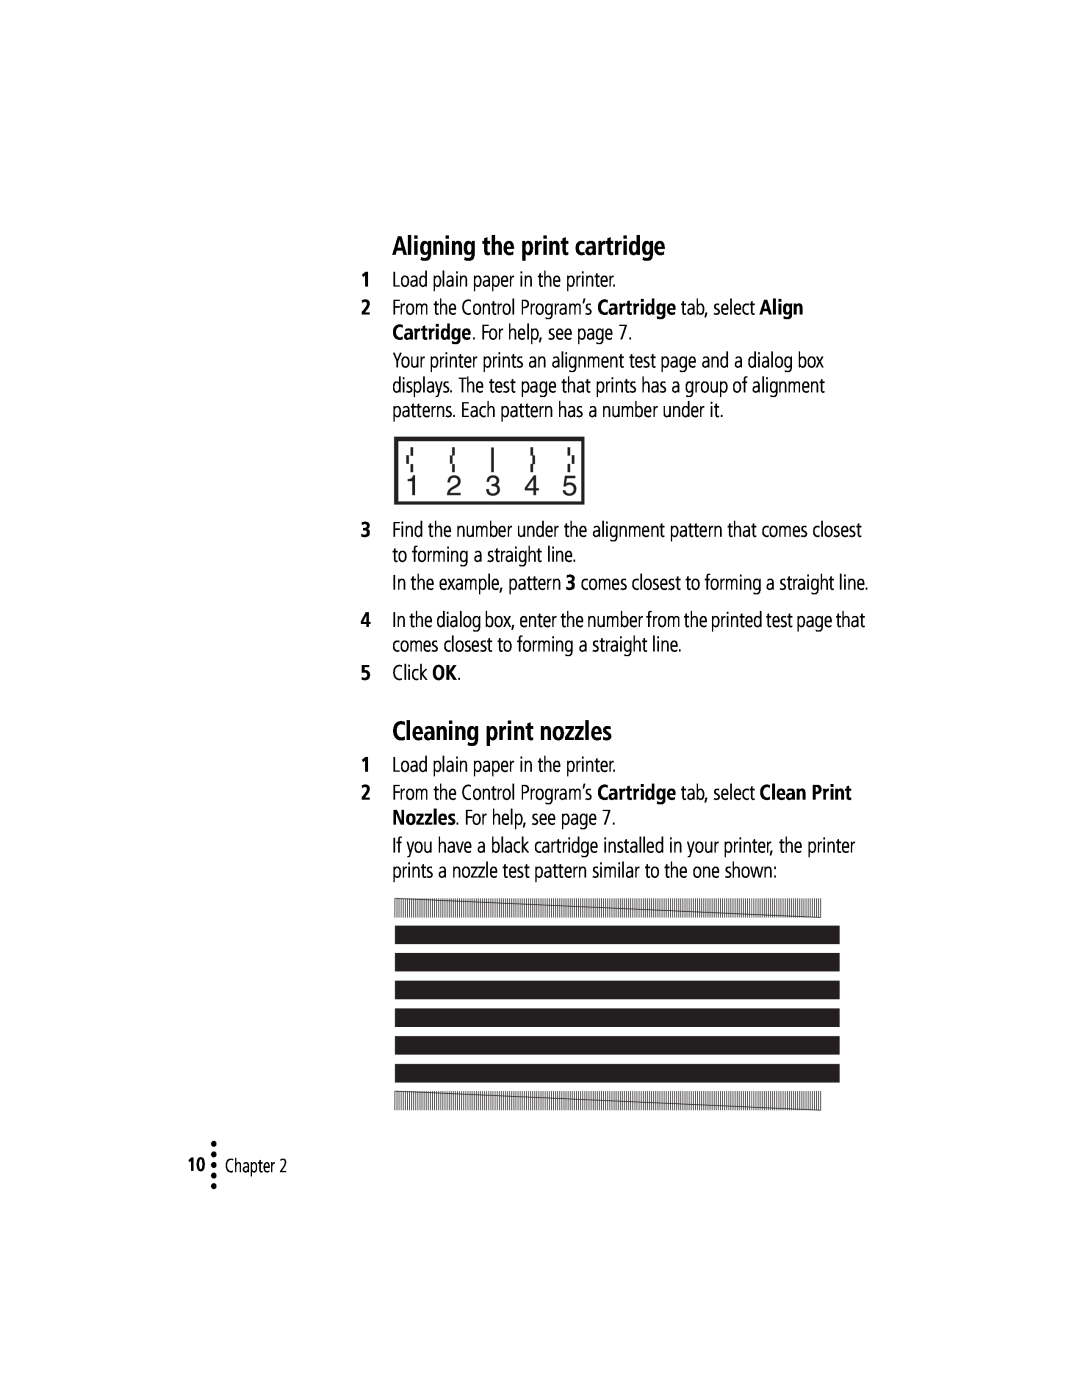 Lexmark Z12 manual Aligning the print cartridge, Cleaning print nozzles, Chapter 